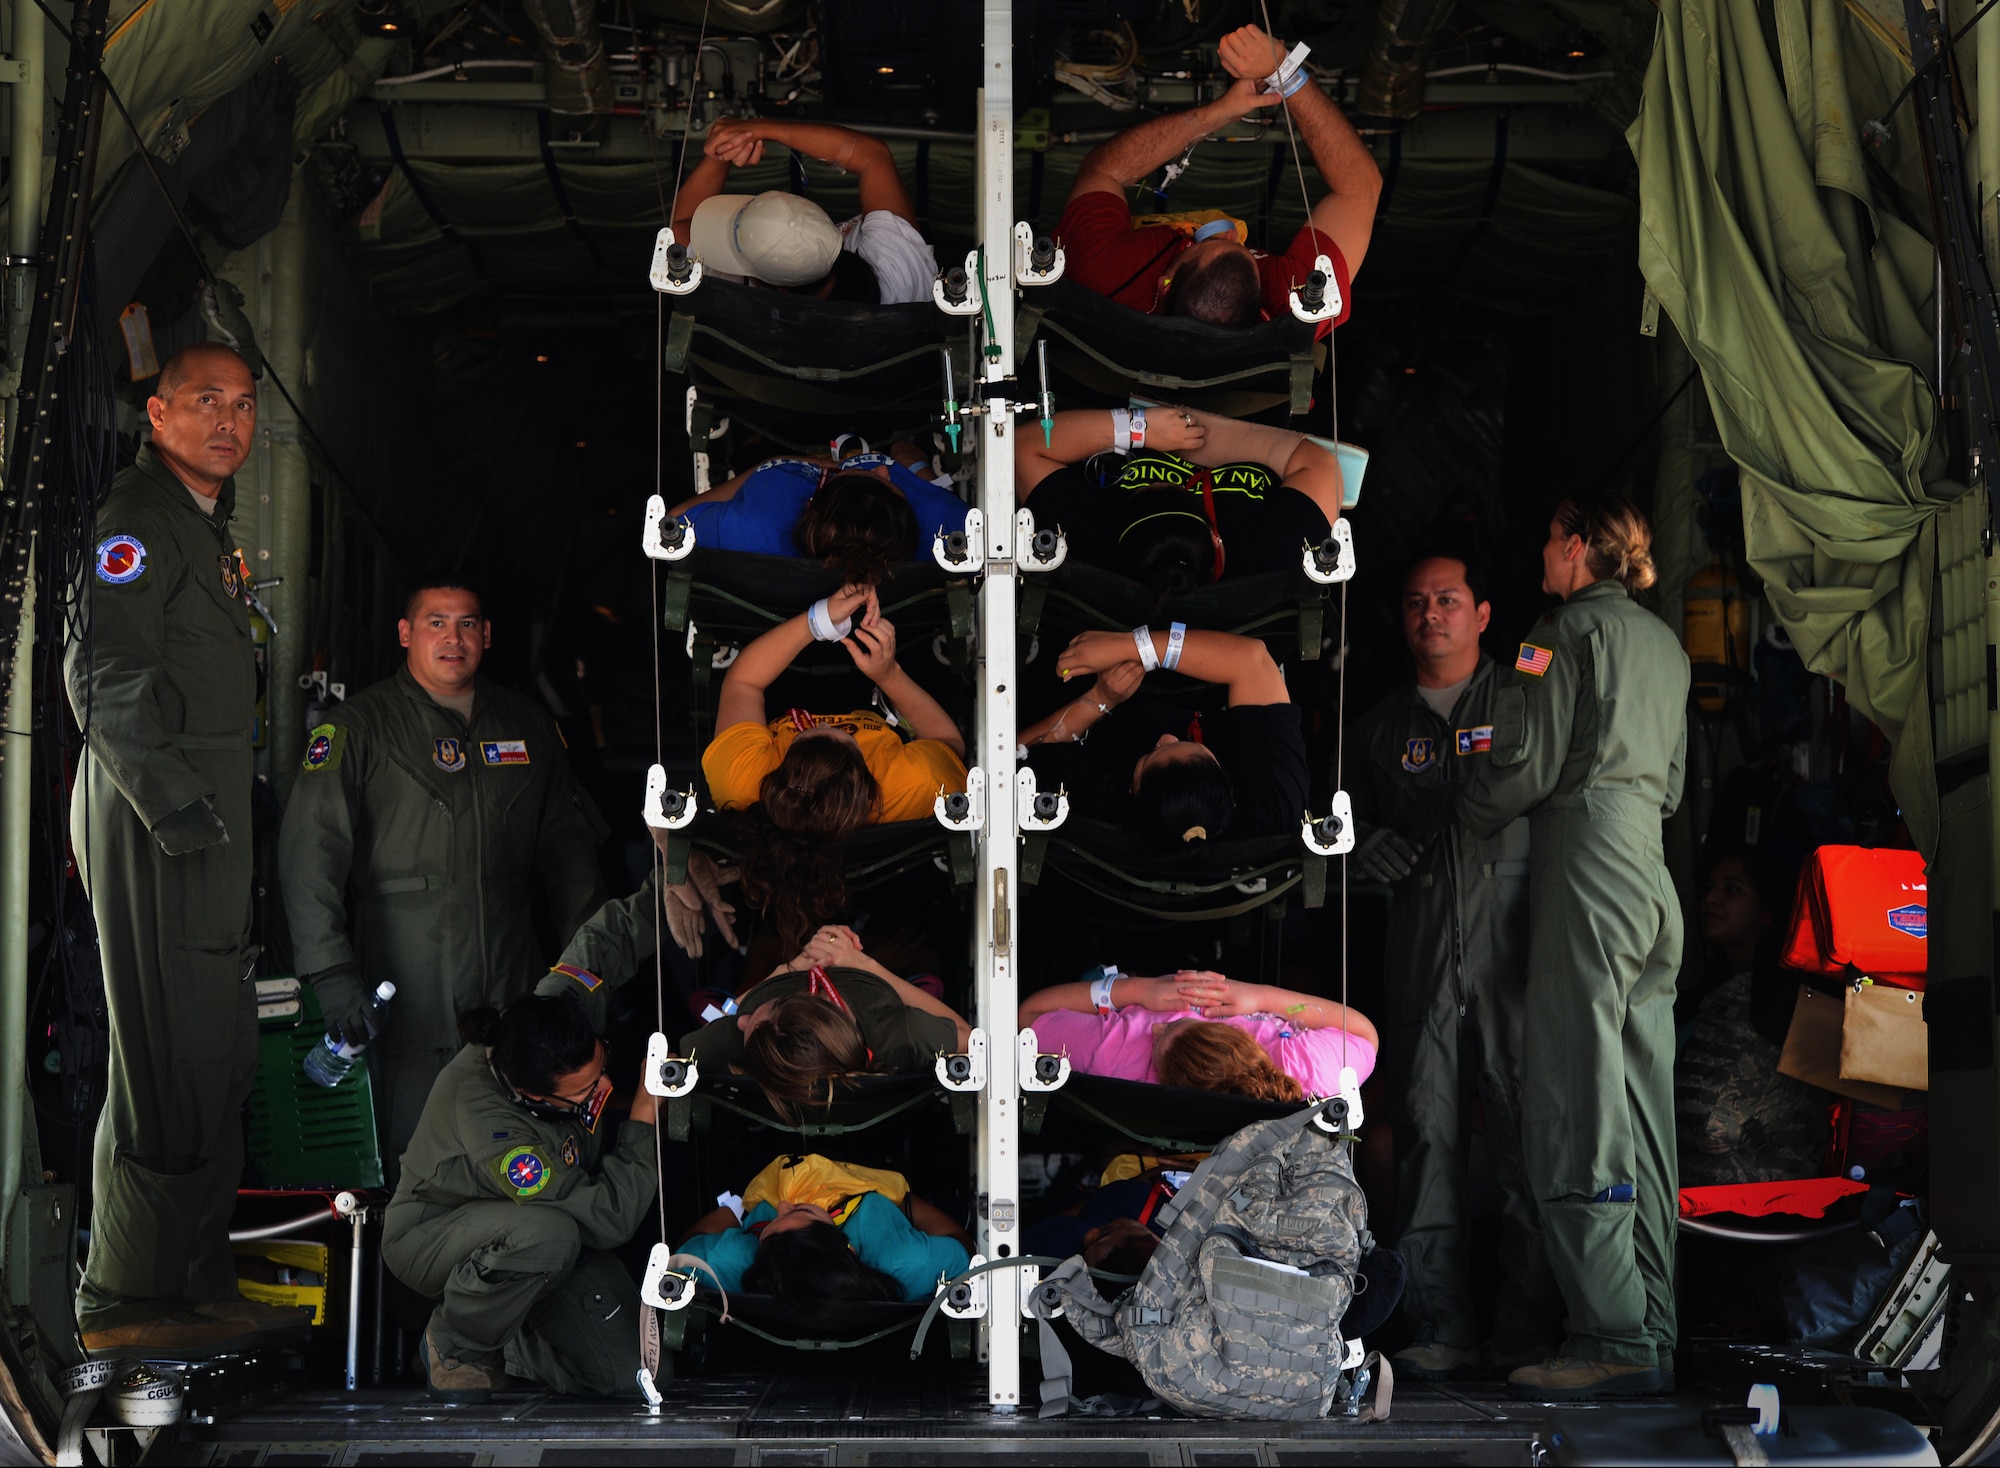 Patients lay on stacked litters onboard a WC-130J Hercules aircraft during a mass casualty exercise, Sept. 19 at Kelly Field Annex, Texas. Airmen from the 433rd Aeromedical Evaluation Squadron provided medical care to patients until they were off-loaded from the aircraft for triage. The patients were placed directly in an ambulance bus and taken to local hospitals, including the San Antonio Military Medical Center at Fort Sam Houston. (U.S. Air Force Photo/A1C Krystal Ardrey)